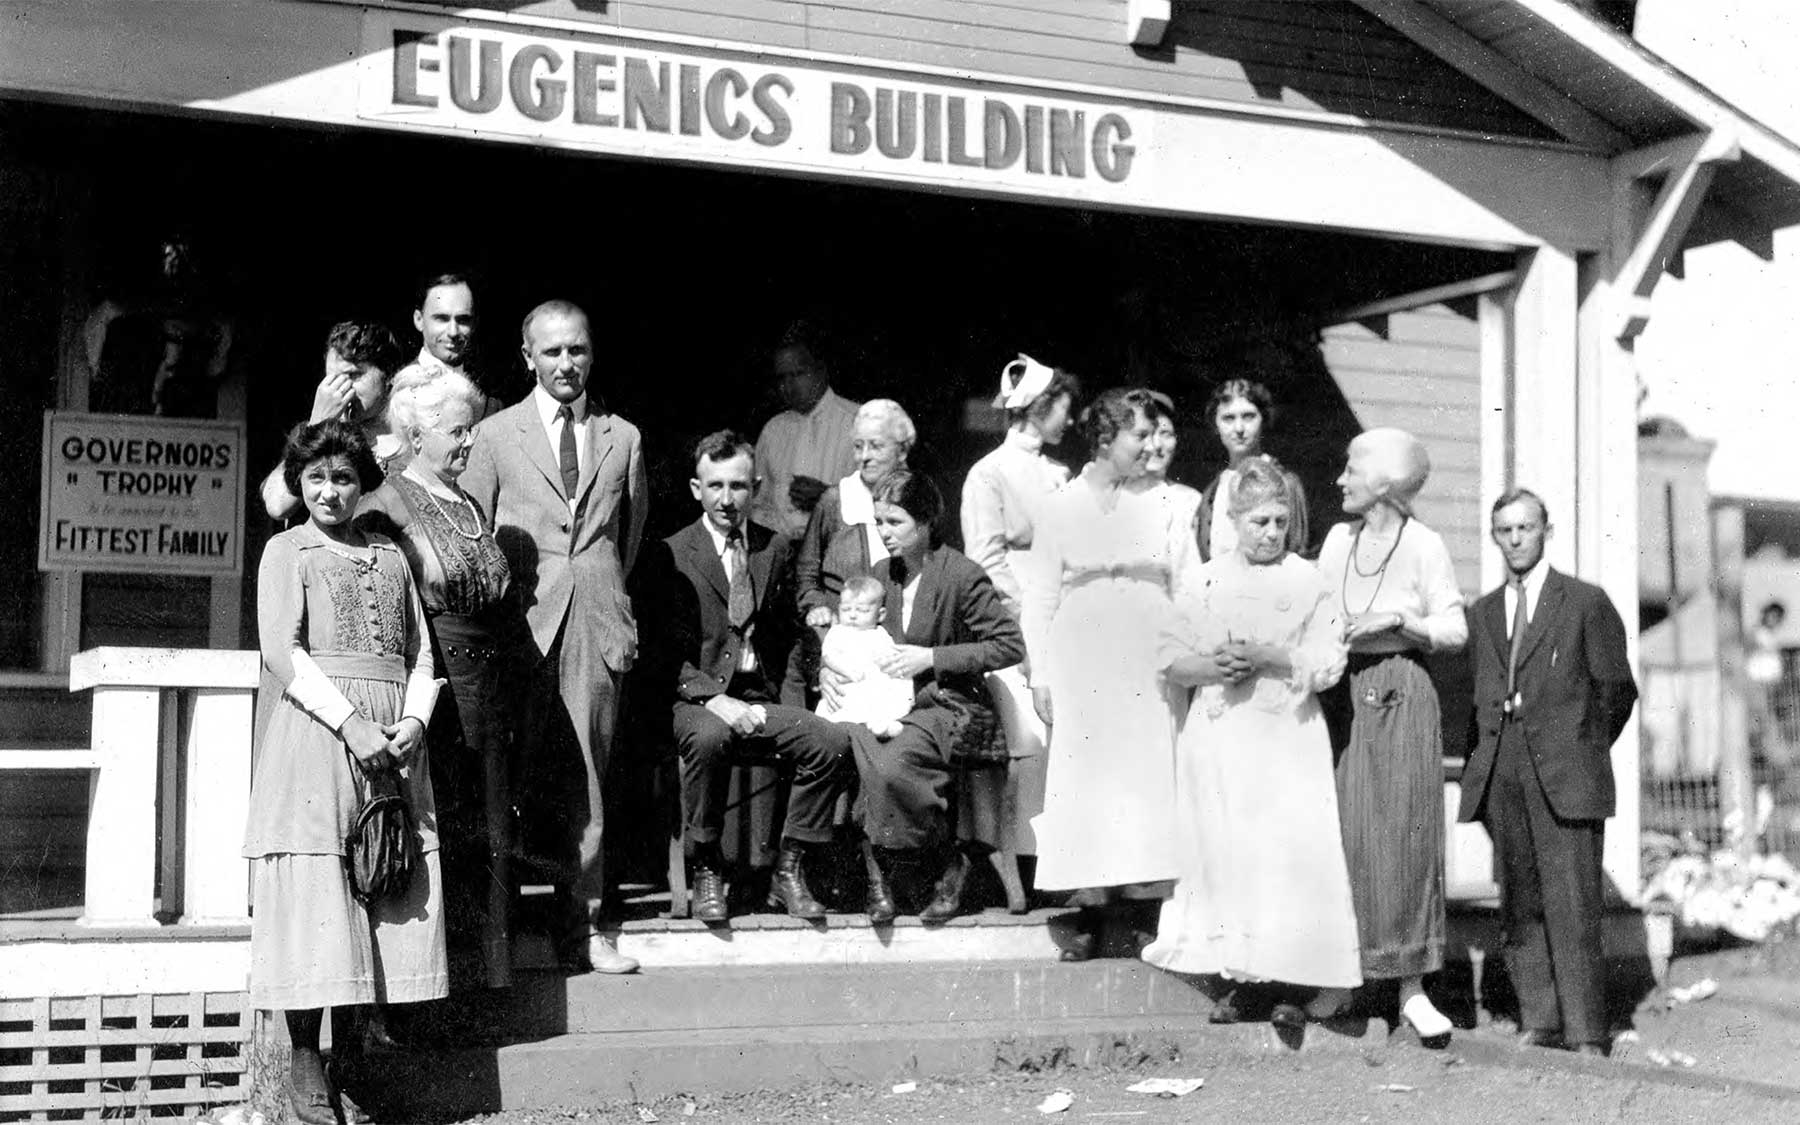 Winners of a Fitter Family contest stand outside the Eugenics Building at the Kansas Free Fair in Topeka, KS, where families are registered for the contests. Credits to: American Philosophical Society. (US: Fair Use; CC BY 2.0)